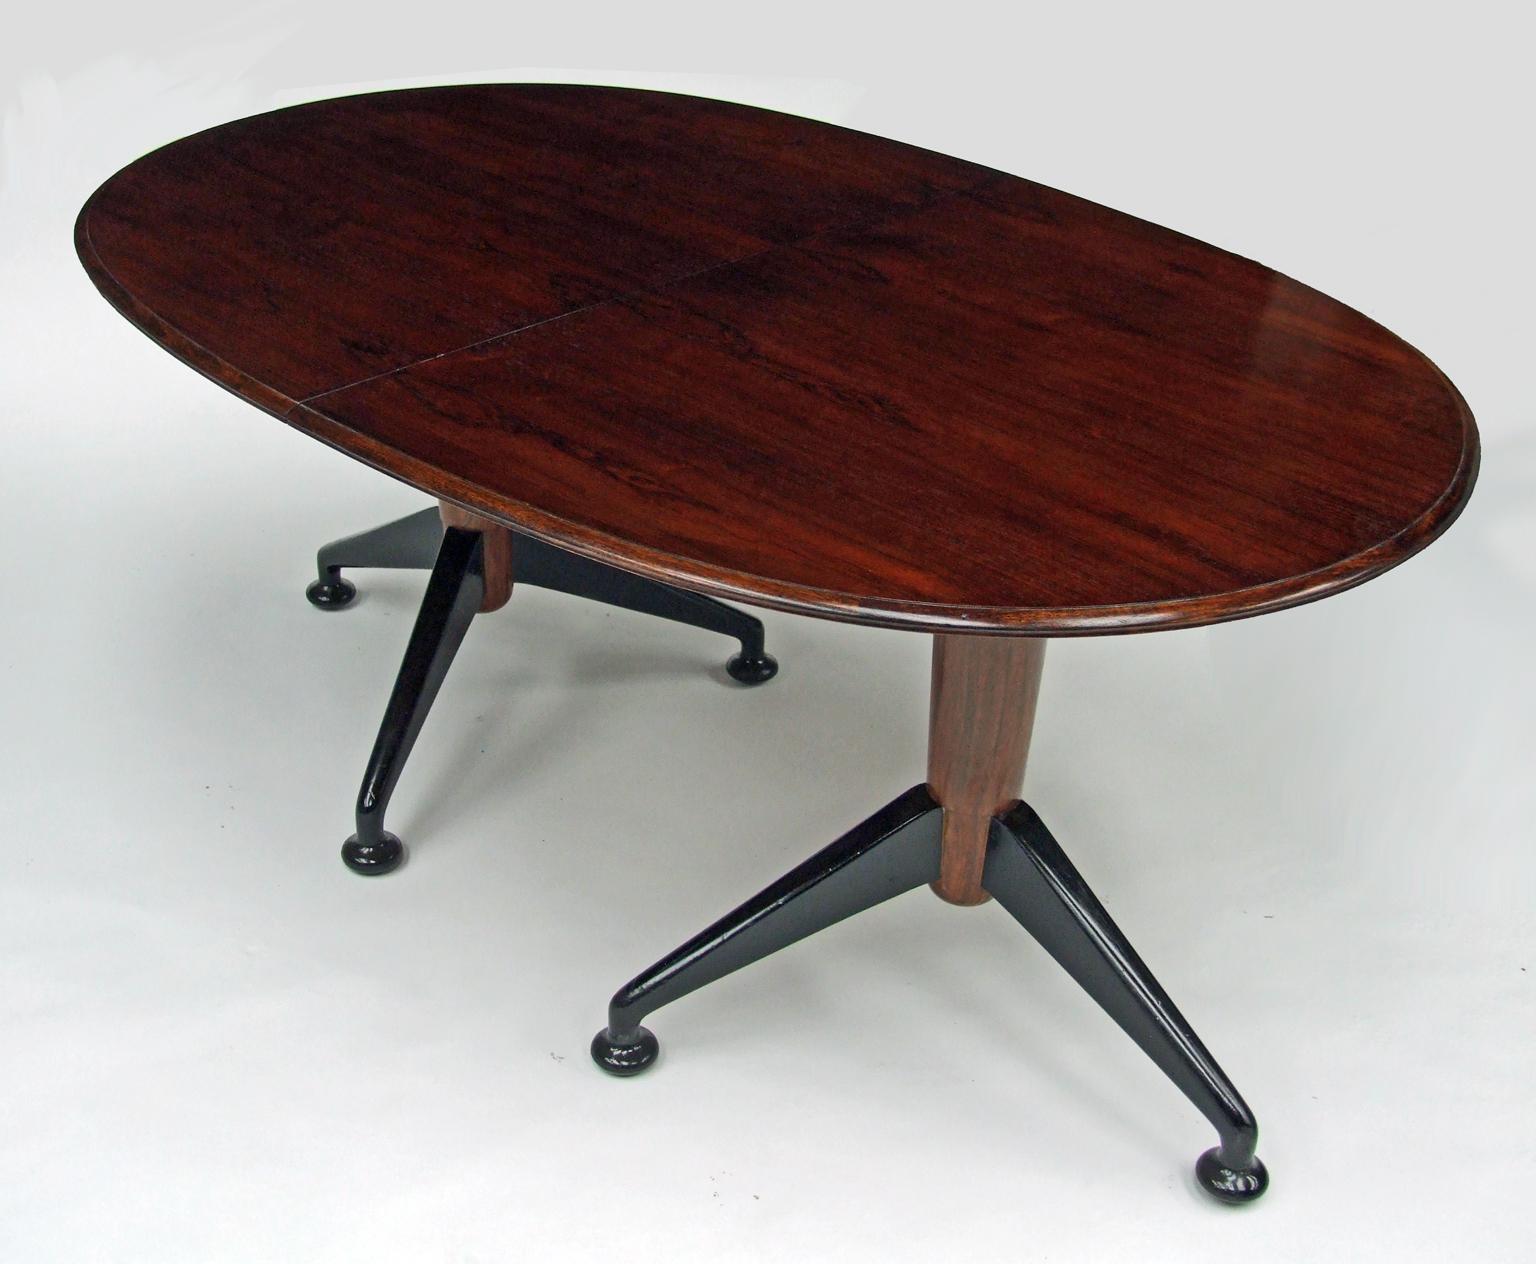 English 1950s Rosewood Extendable Oval Dining Table by A J Milne for Heals, London For Sale